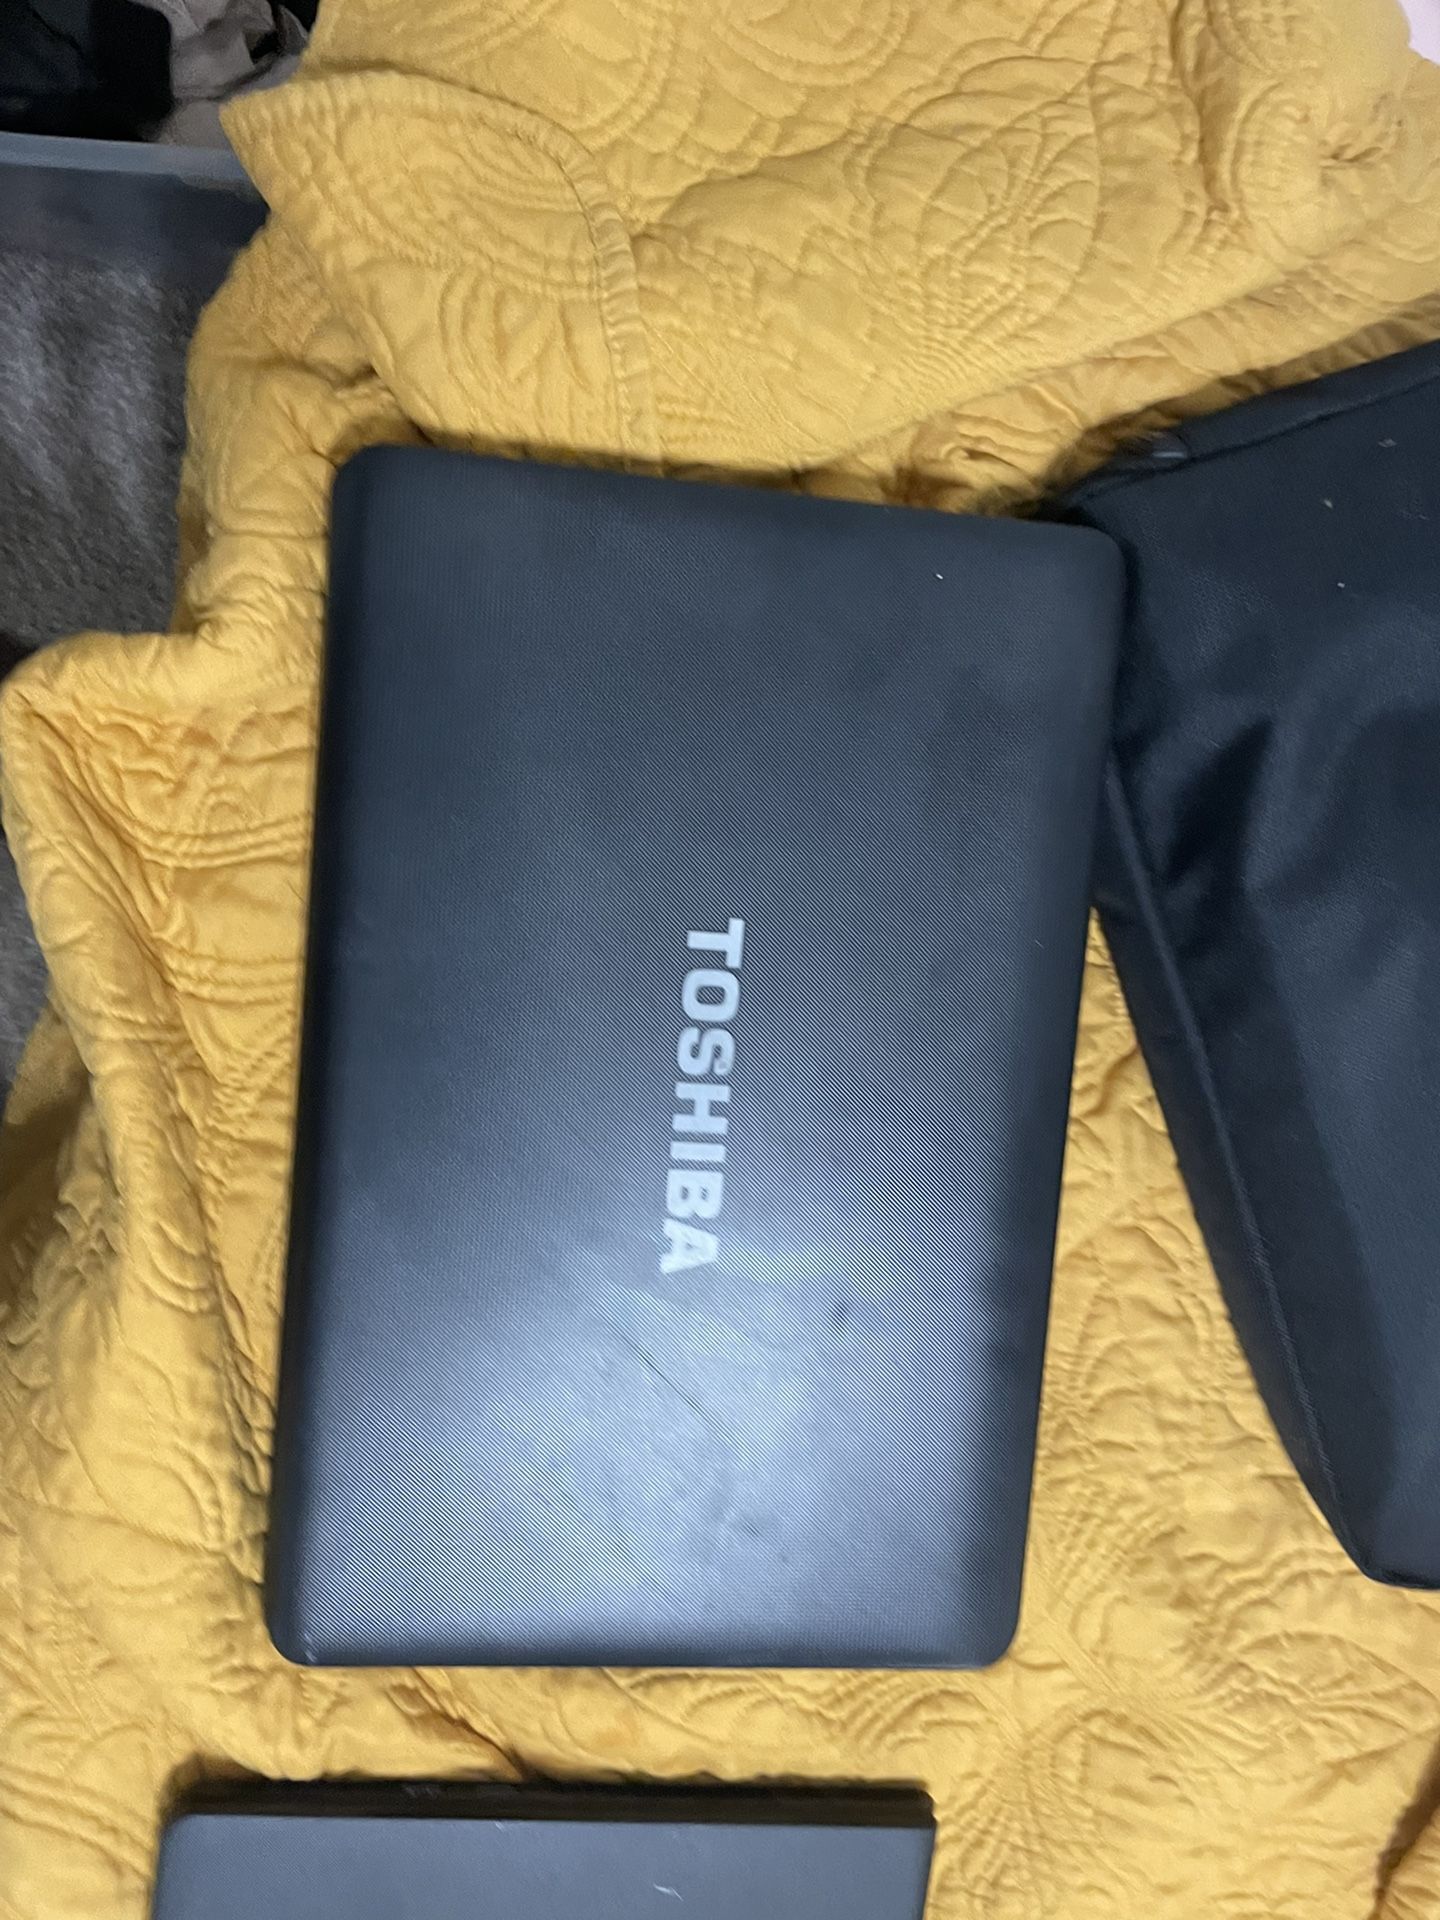 Toshiba Laptop  Great  Deal 